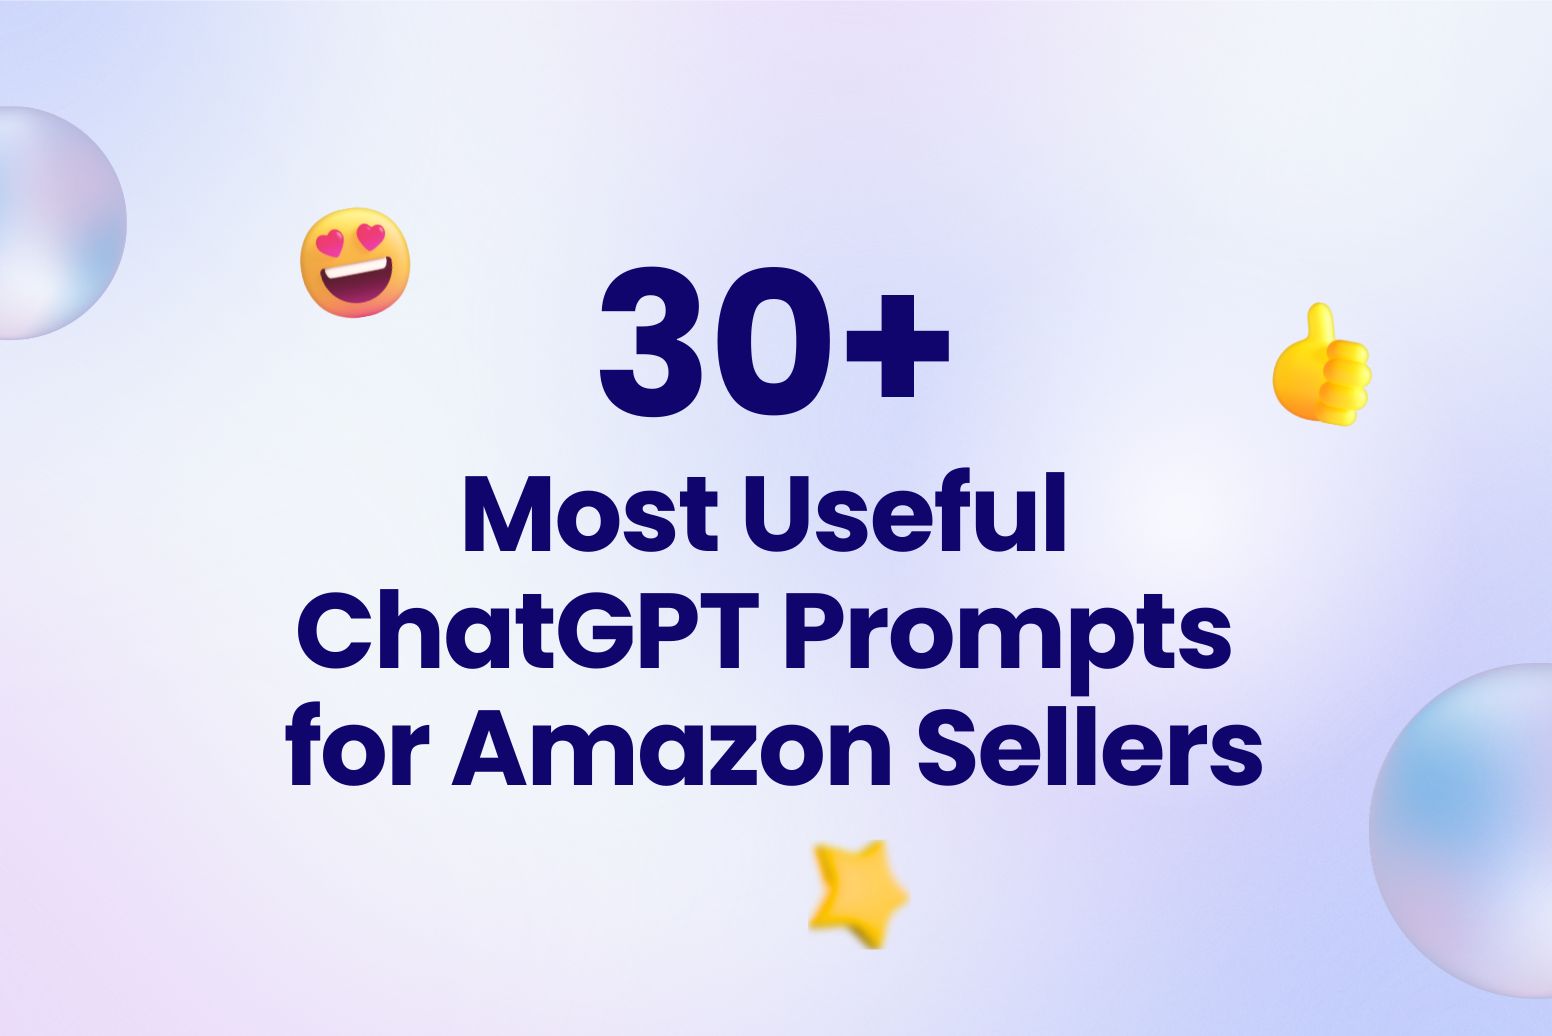 30+ Most Useful ChatGPT Prompts for Amazon Sellers